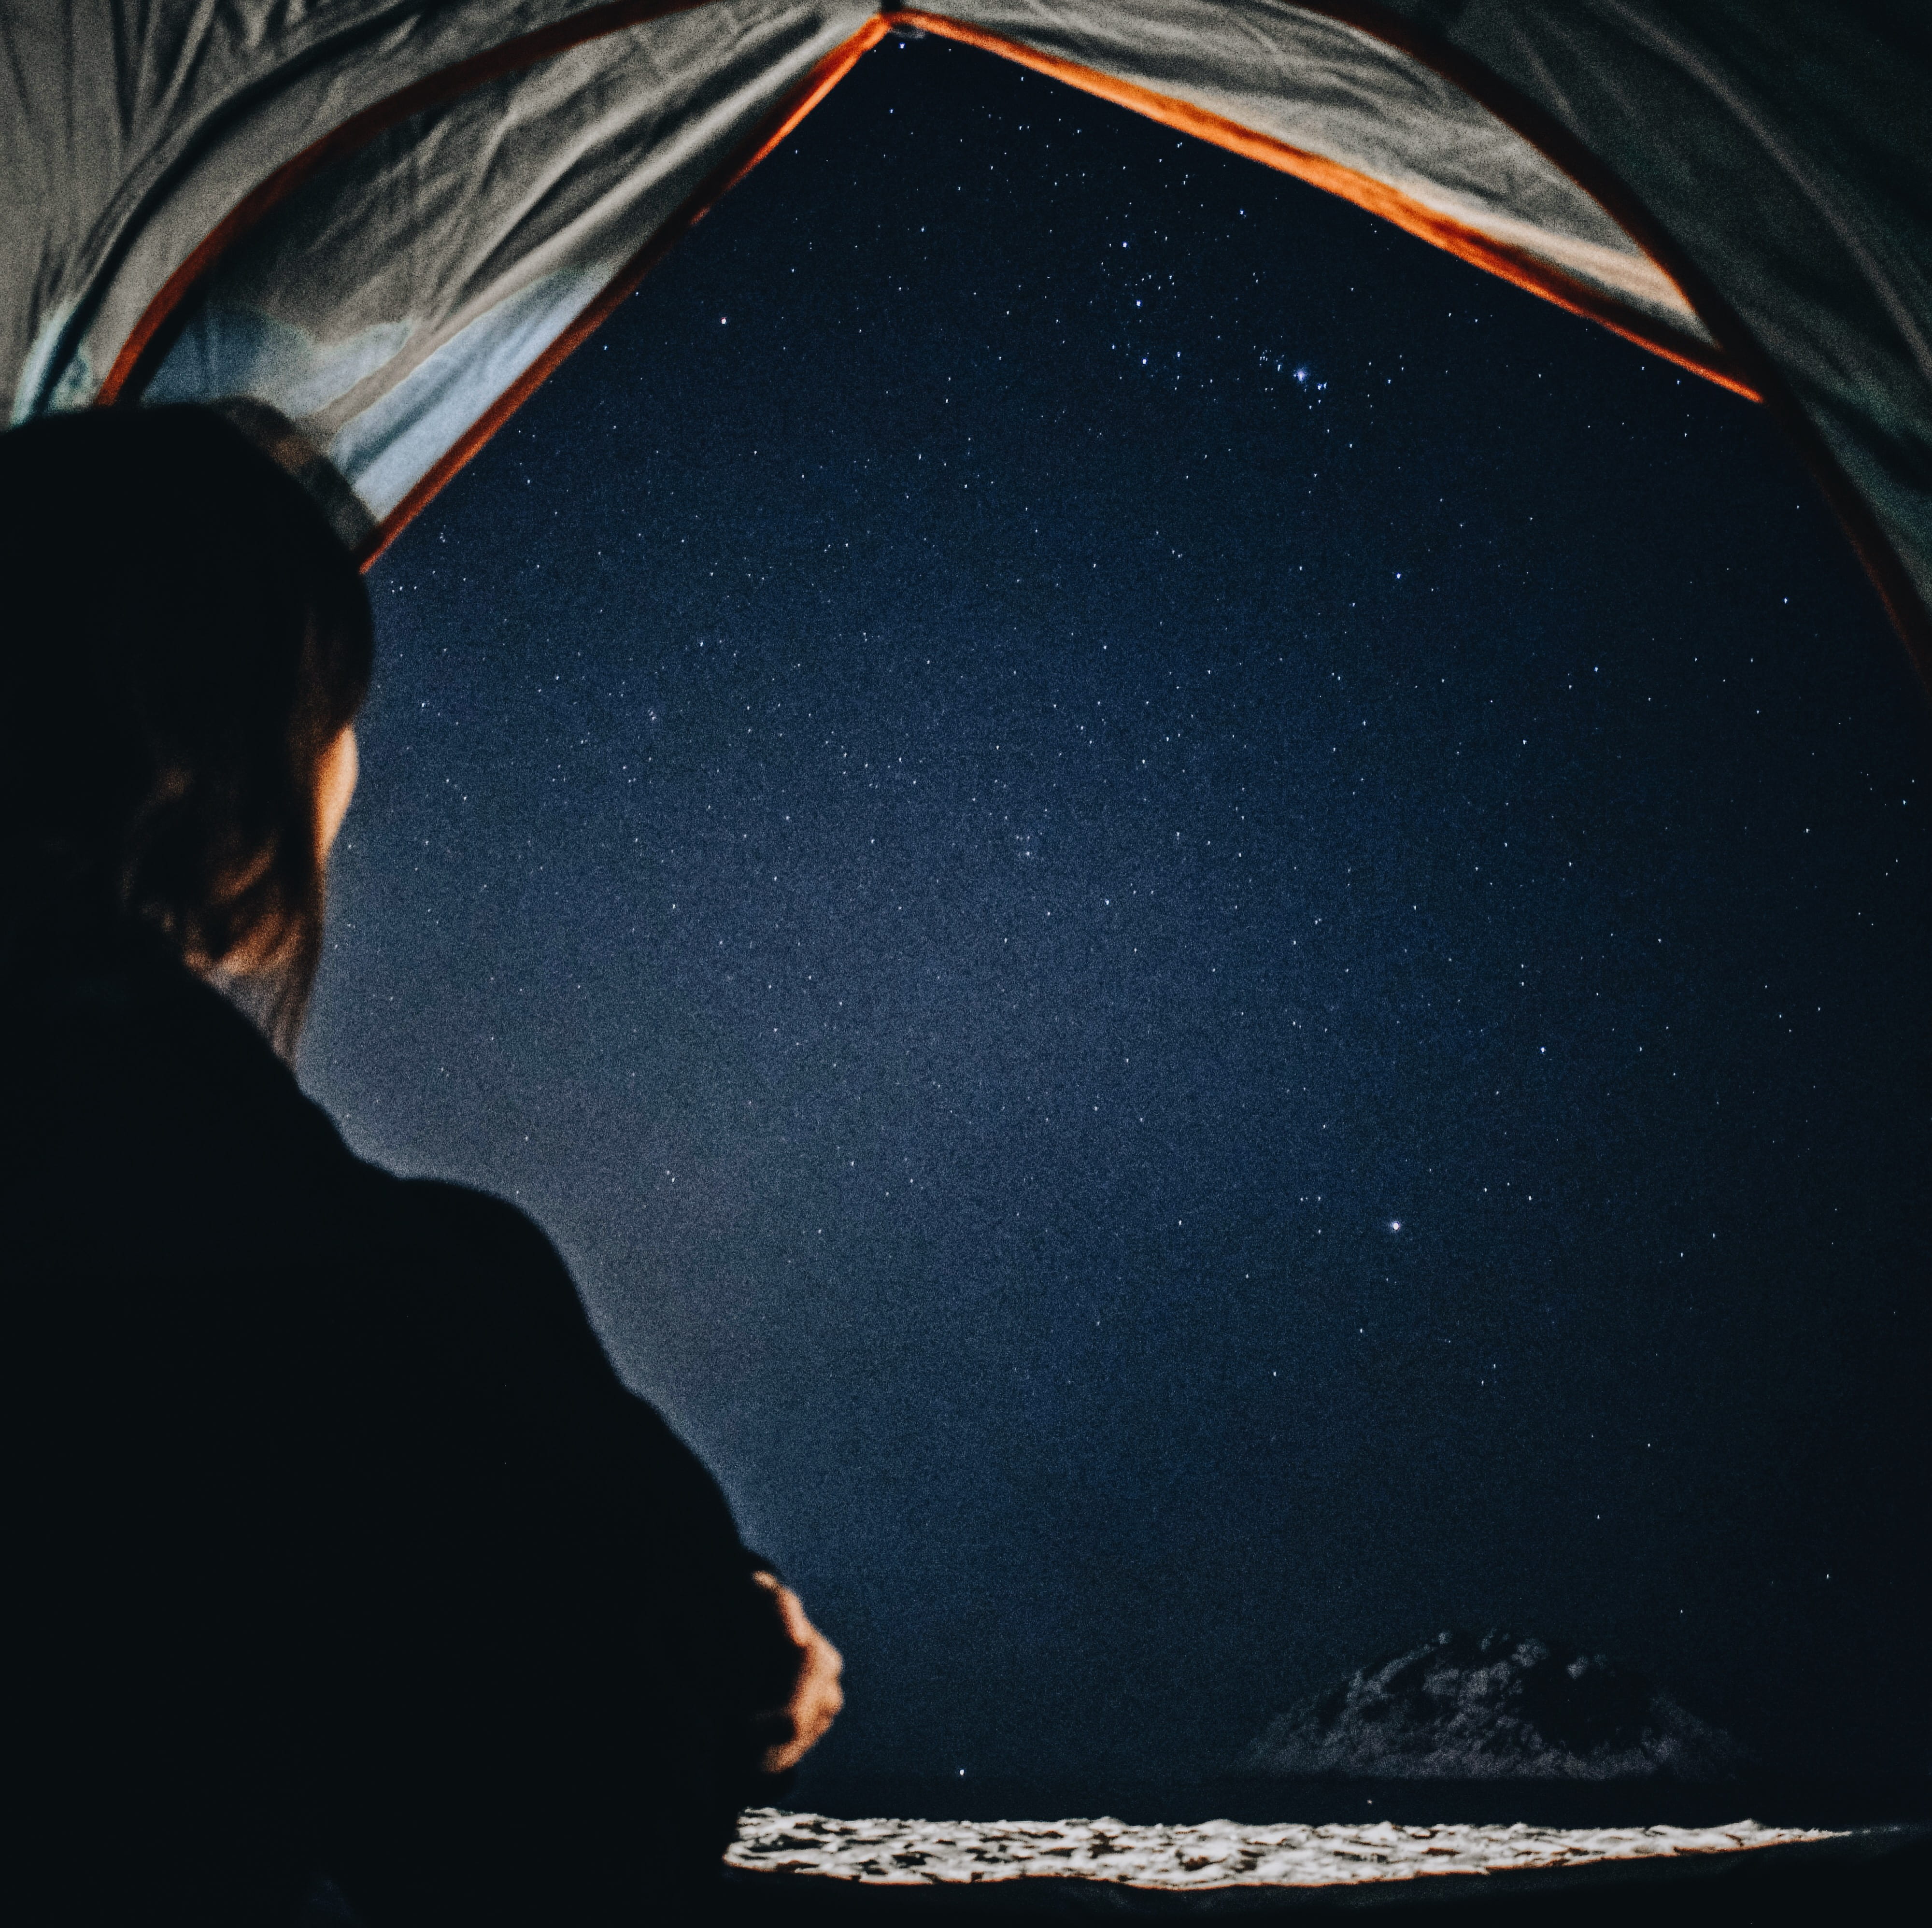 woman staring at stars at sky at night, person wearing black coat sitting inside gray camping tent with view of seashore during nighttime